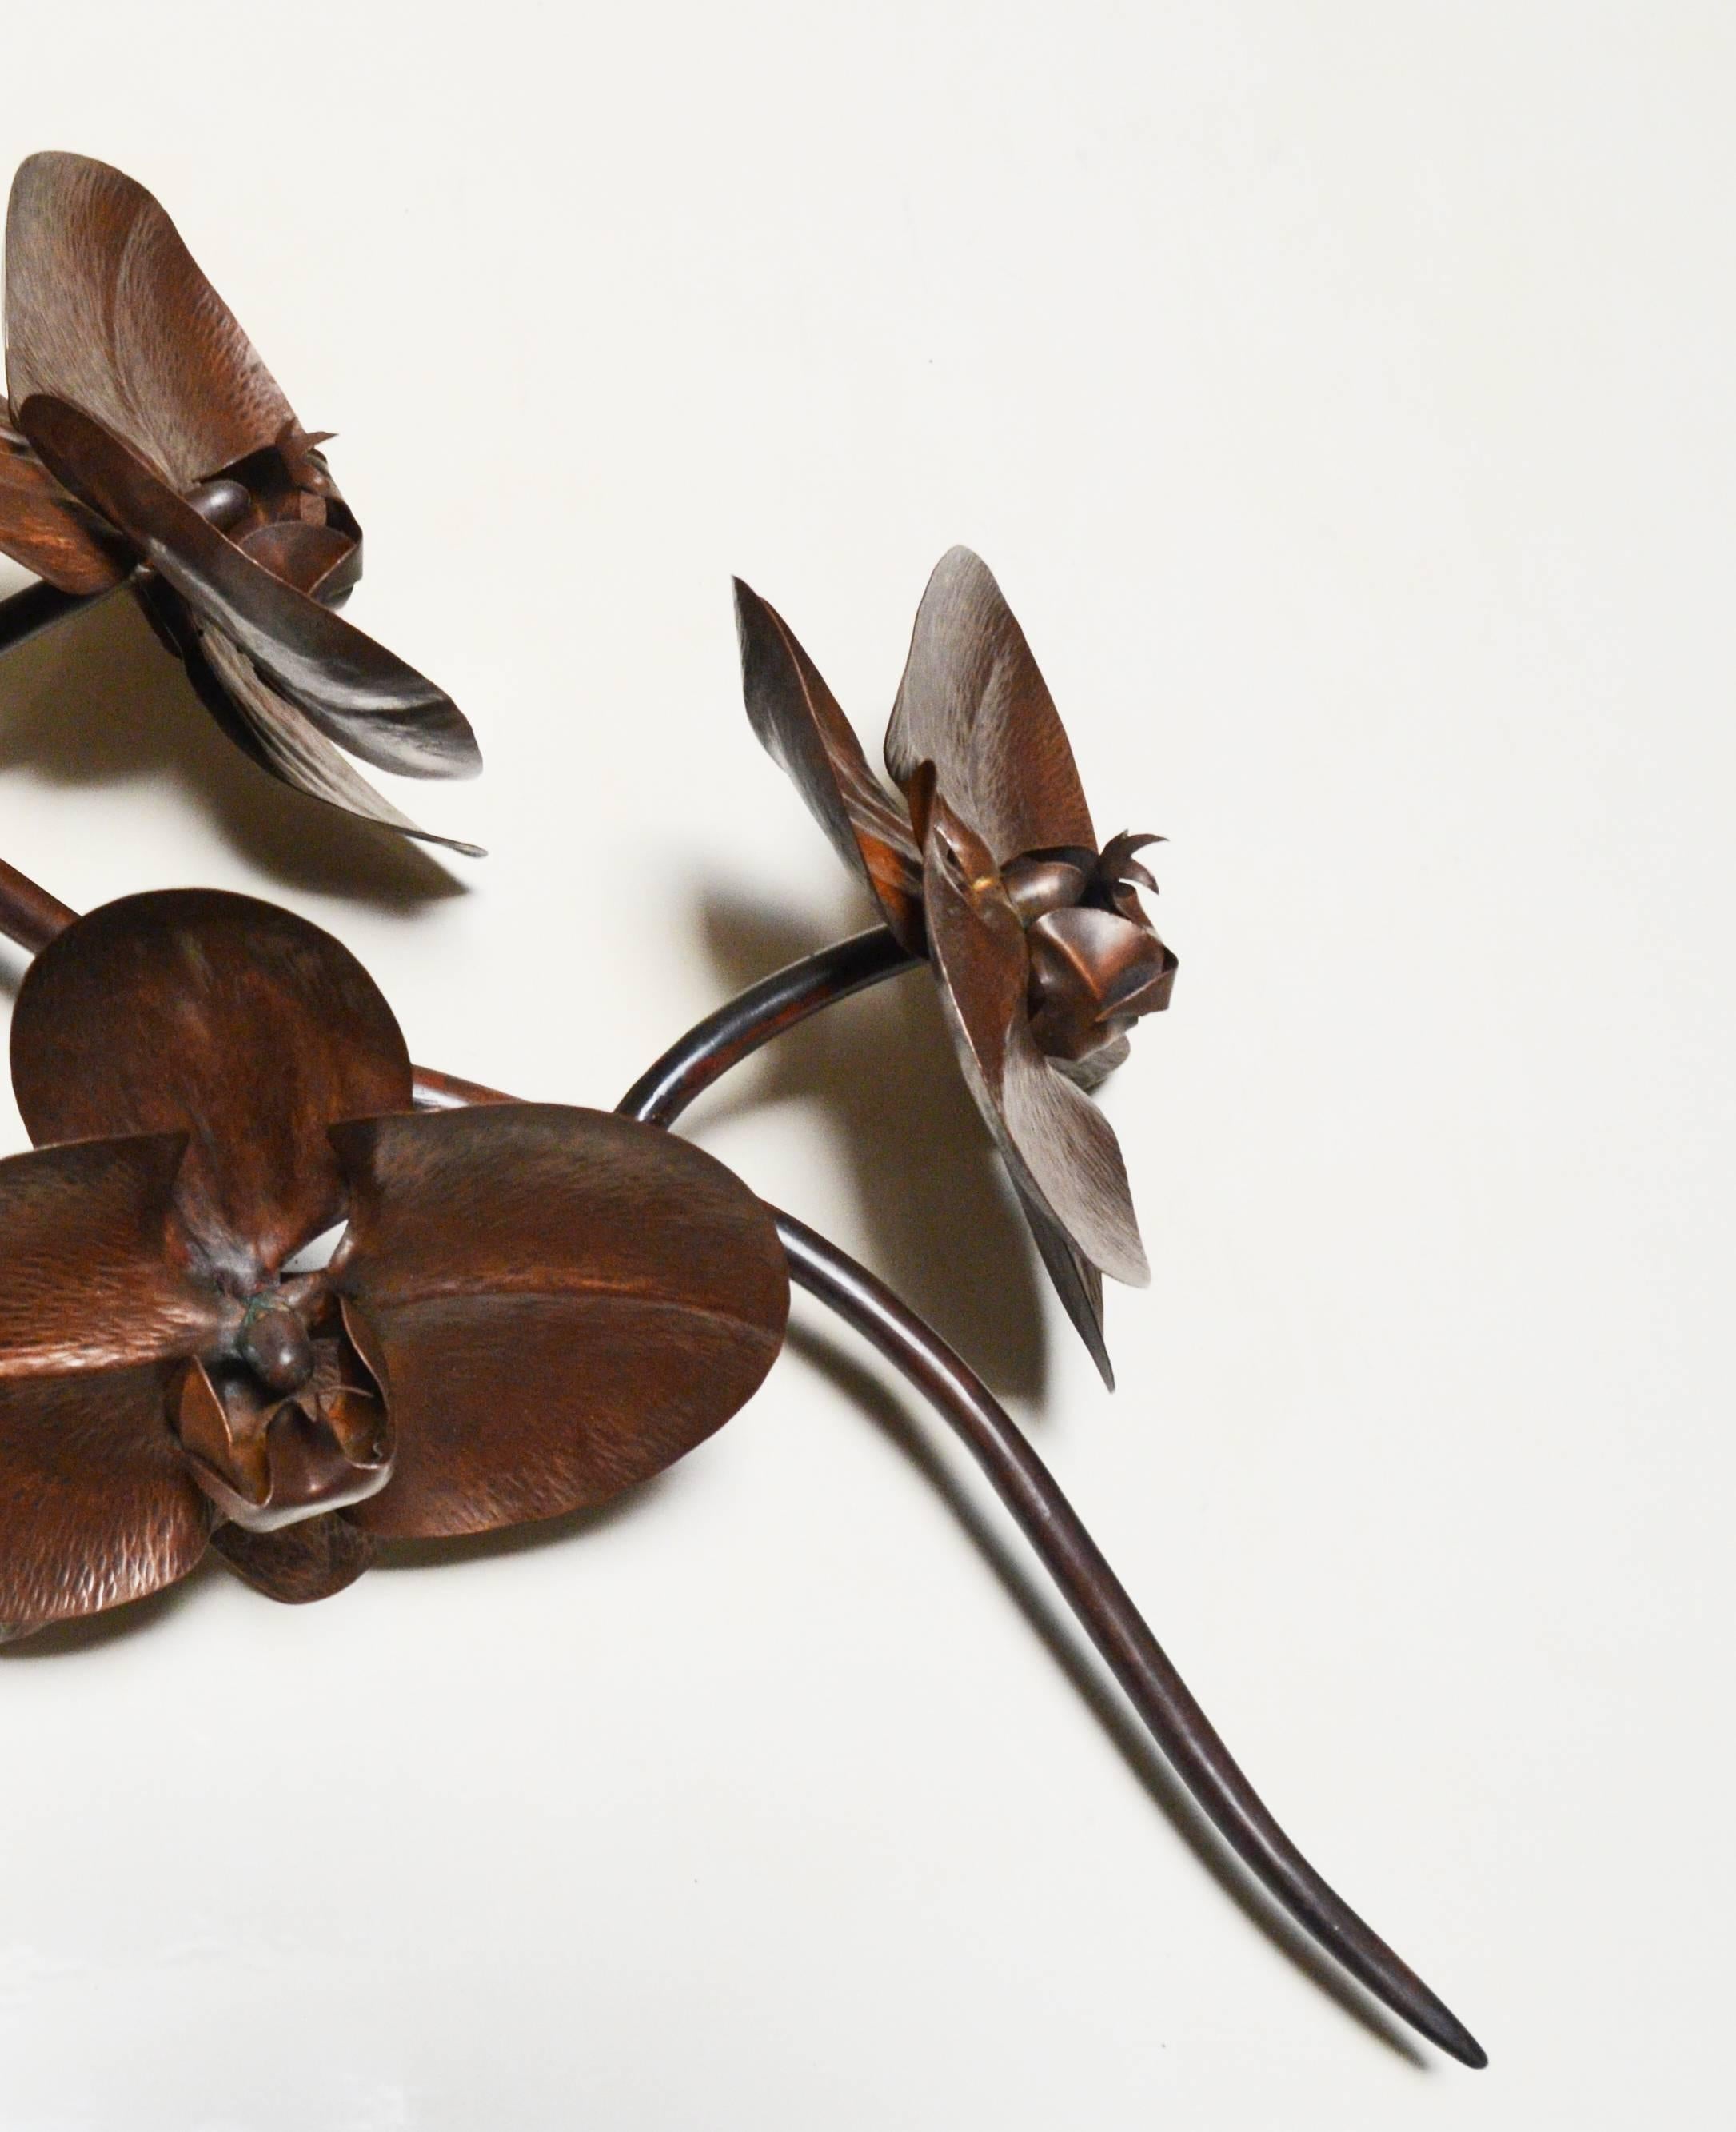 Large Orchid Sculpture by Robert Kuo, Hand Repoussé Copper, Limited Edition 2